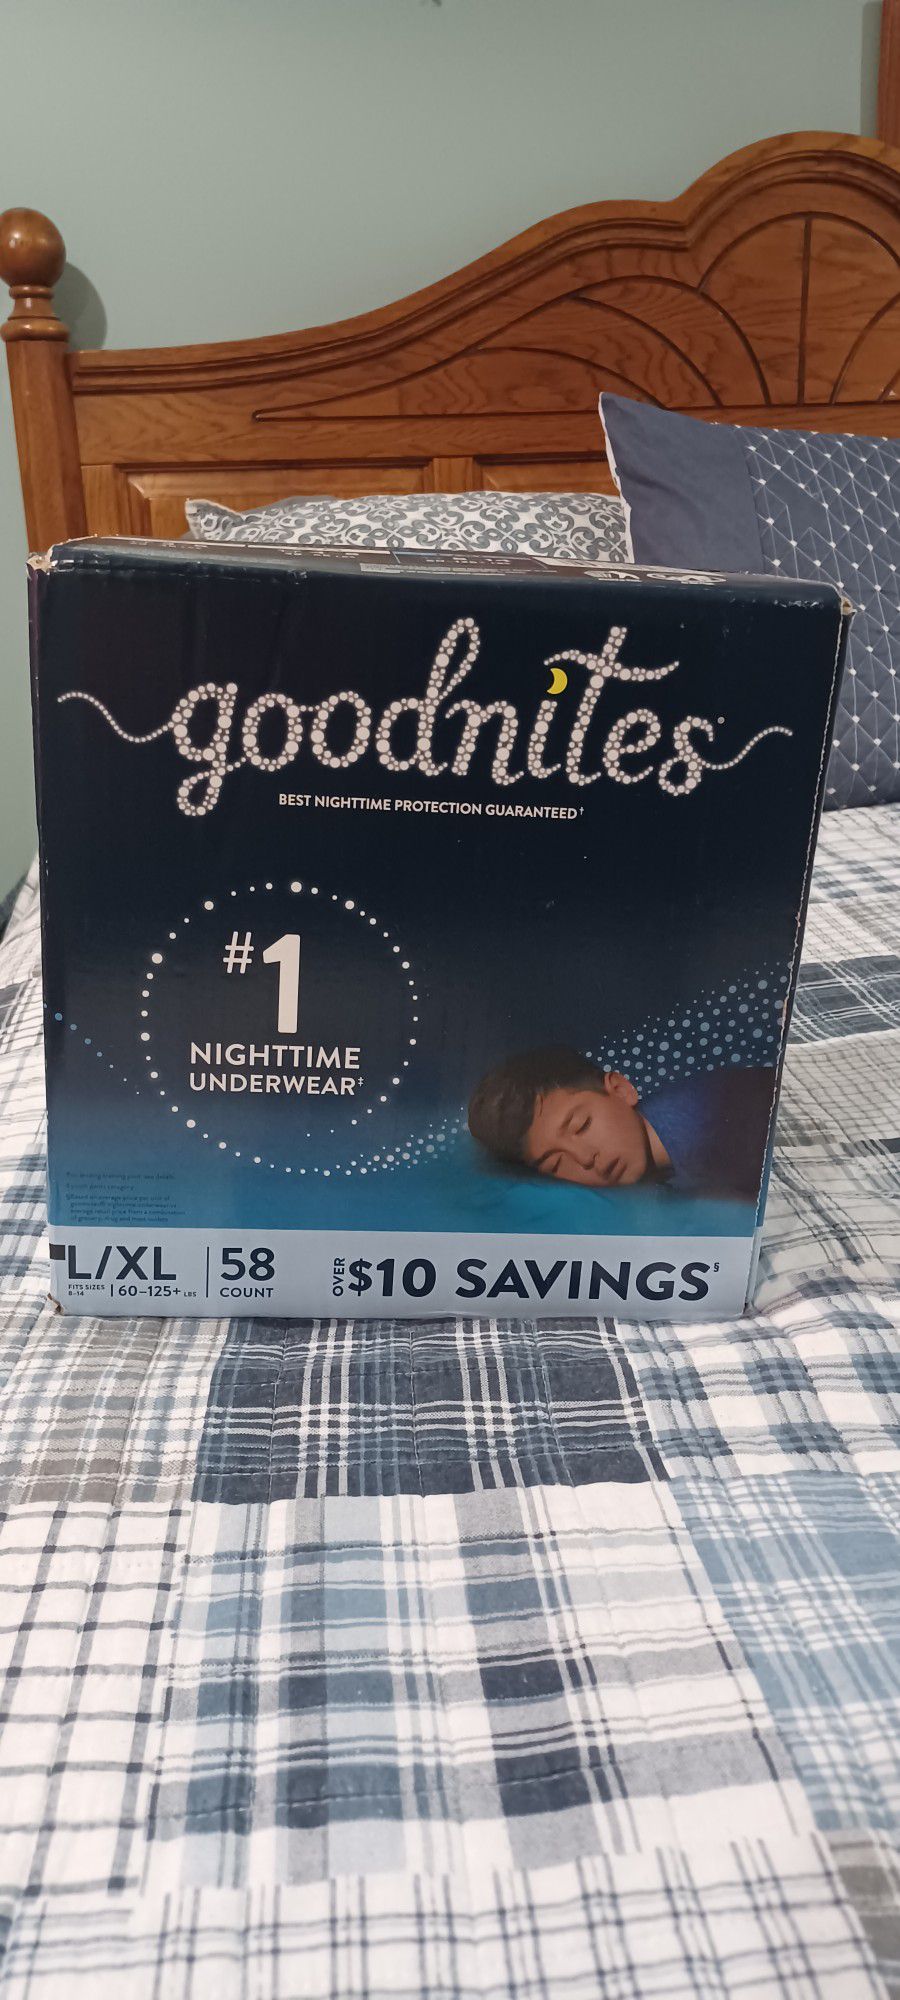 Boys Goodnites Disposable Diapers Size L/XL $20